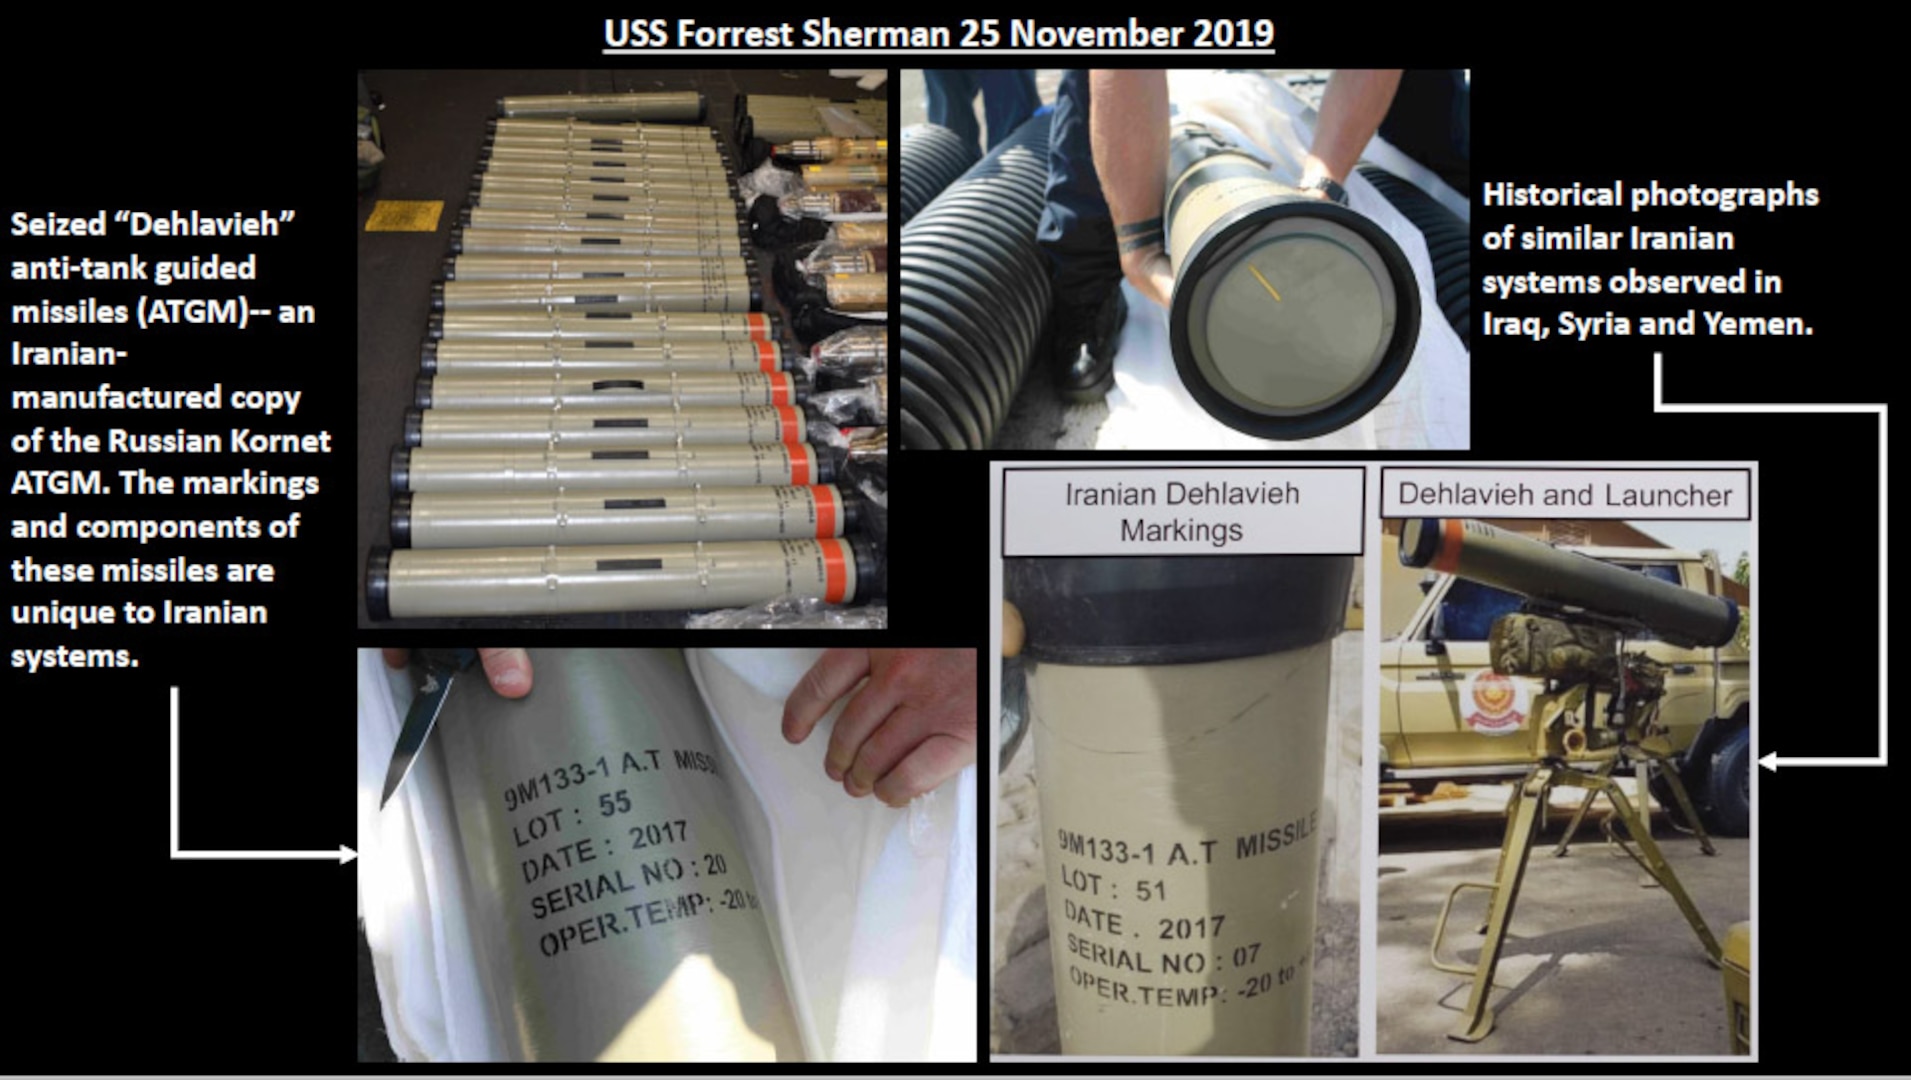 Here's a look at the missiles seized by the USS FORREST SHERMAN and confirmed by the UN as likely Iranian DEH-LA-VIA anti-tank guided missiles. The markings and components of these missiles are unique to Iranian systems.
The launch tube markings on the Iranian version are left-justified rather than center justified on the Russian variant.